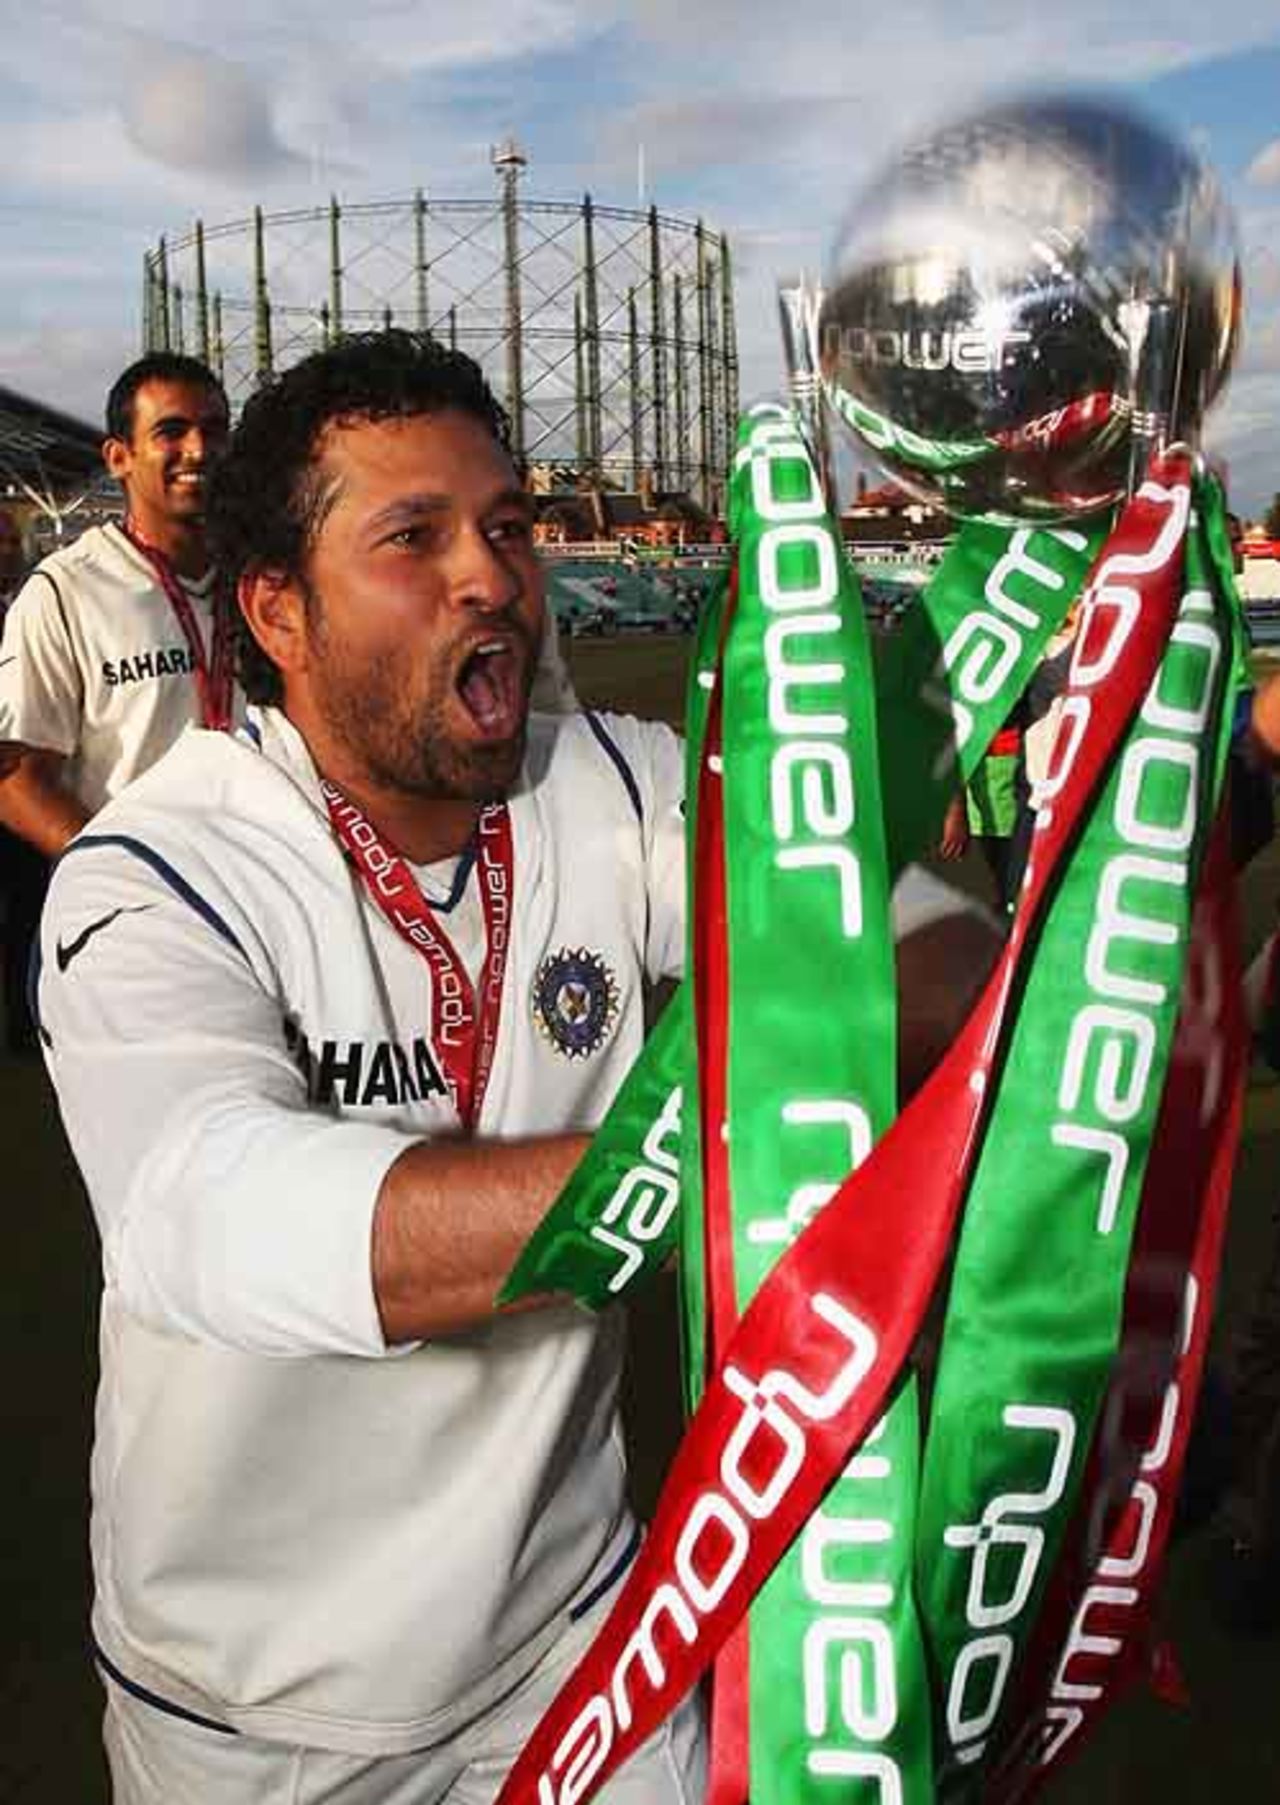 Sachin Tendulkar enjoys his first series win in England, England v India, 3rd Test, The Oval, 5th day, August 13, 2007